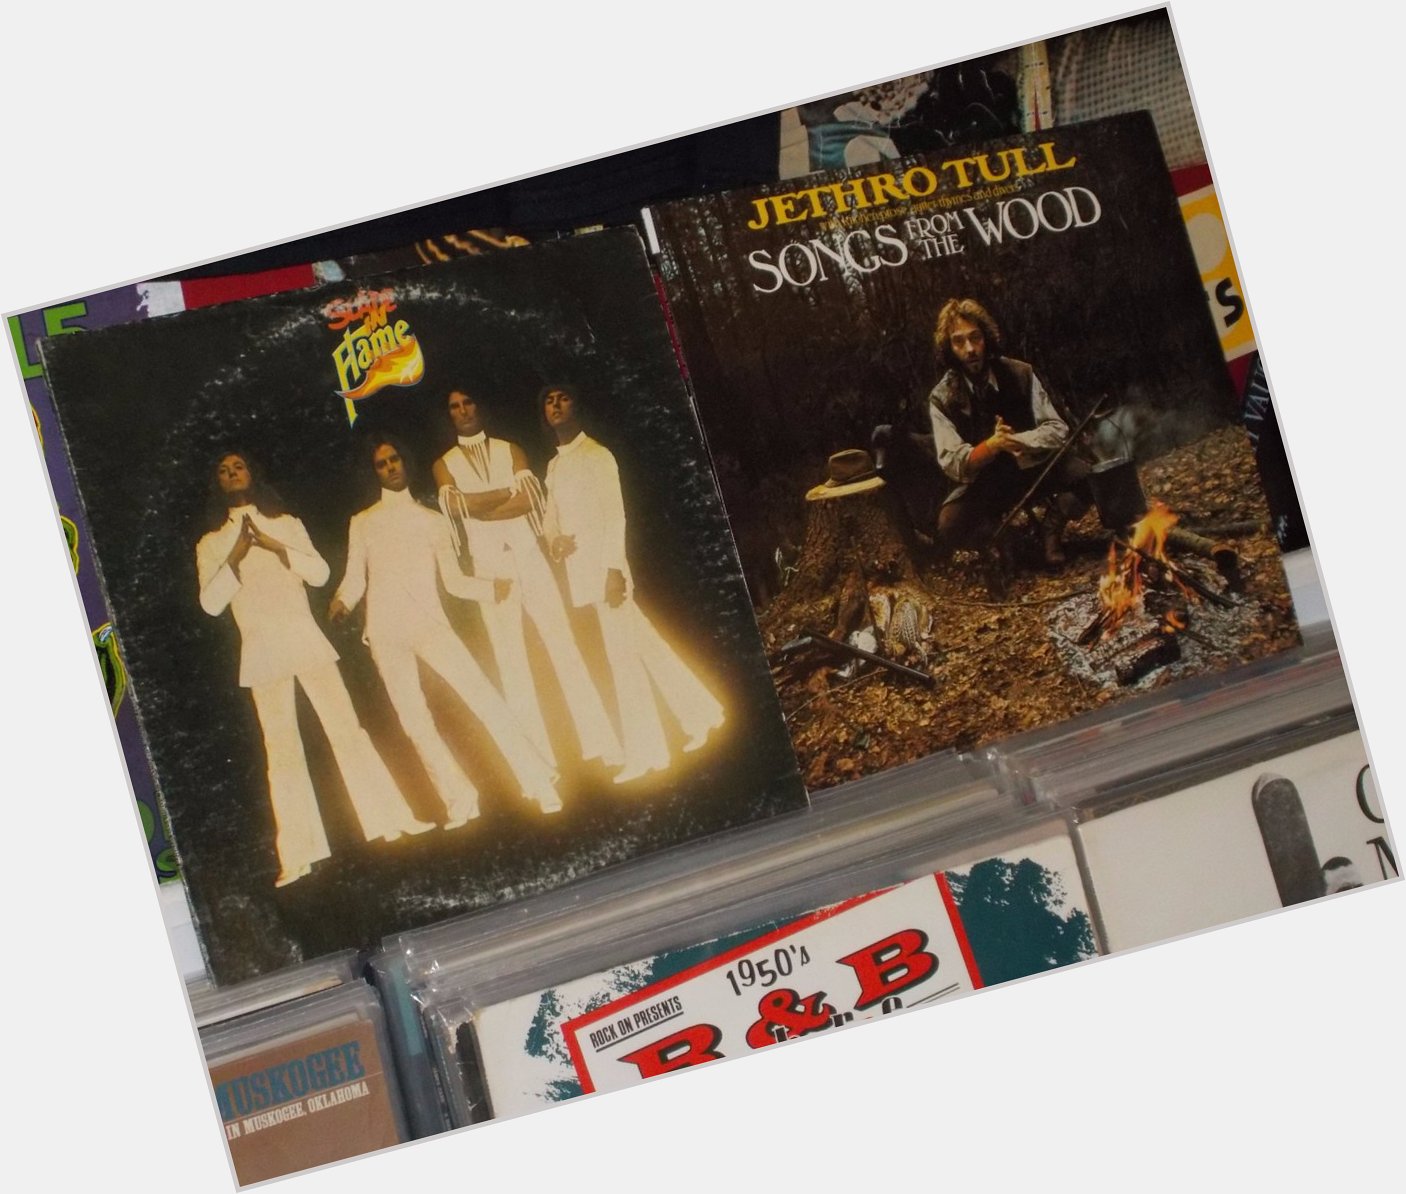 Happy Birthday to Don Powell of Slade & Barriemore Barlow of Jethro Tull 